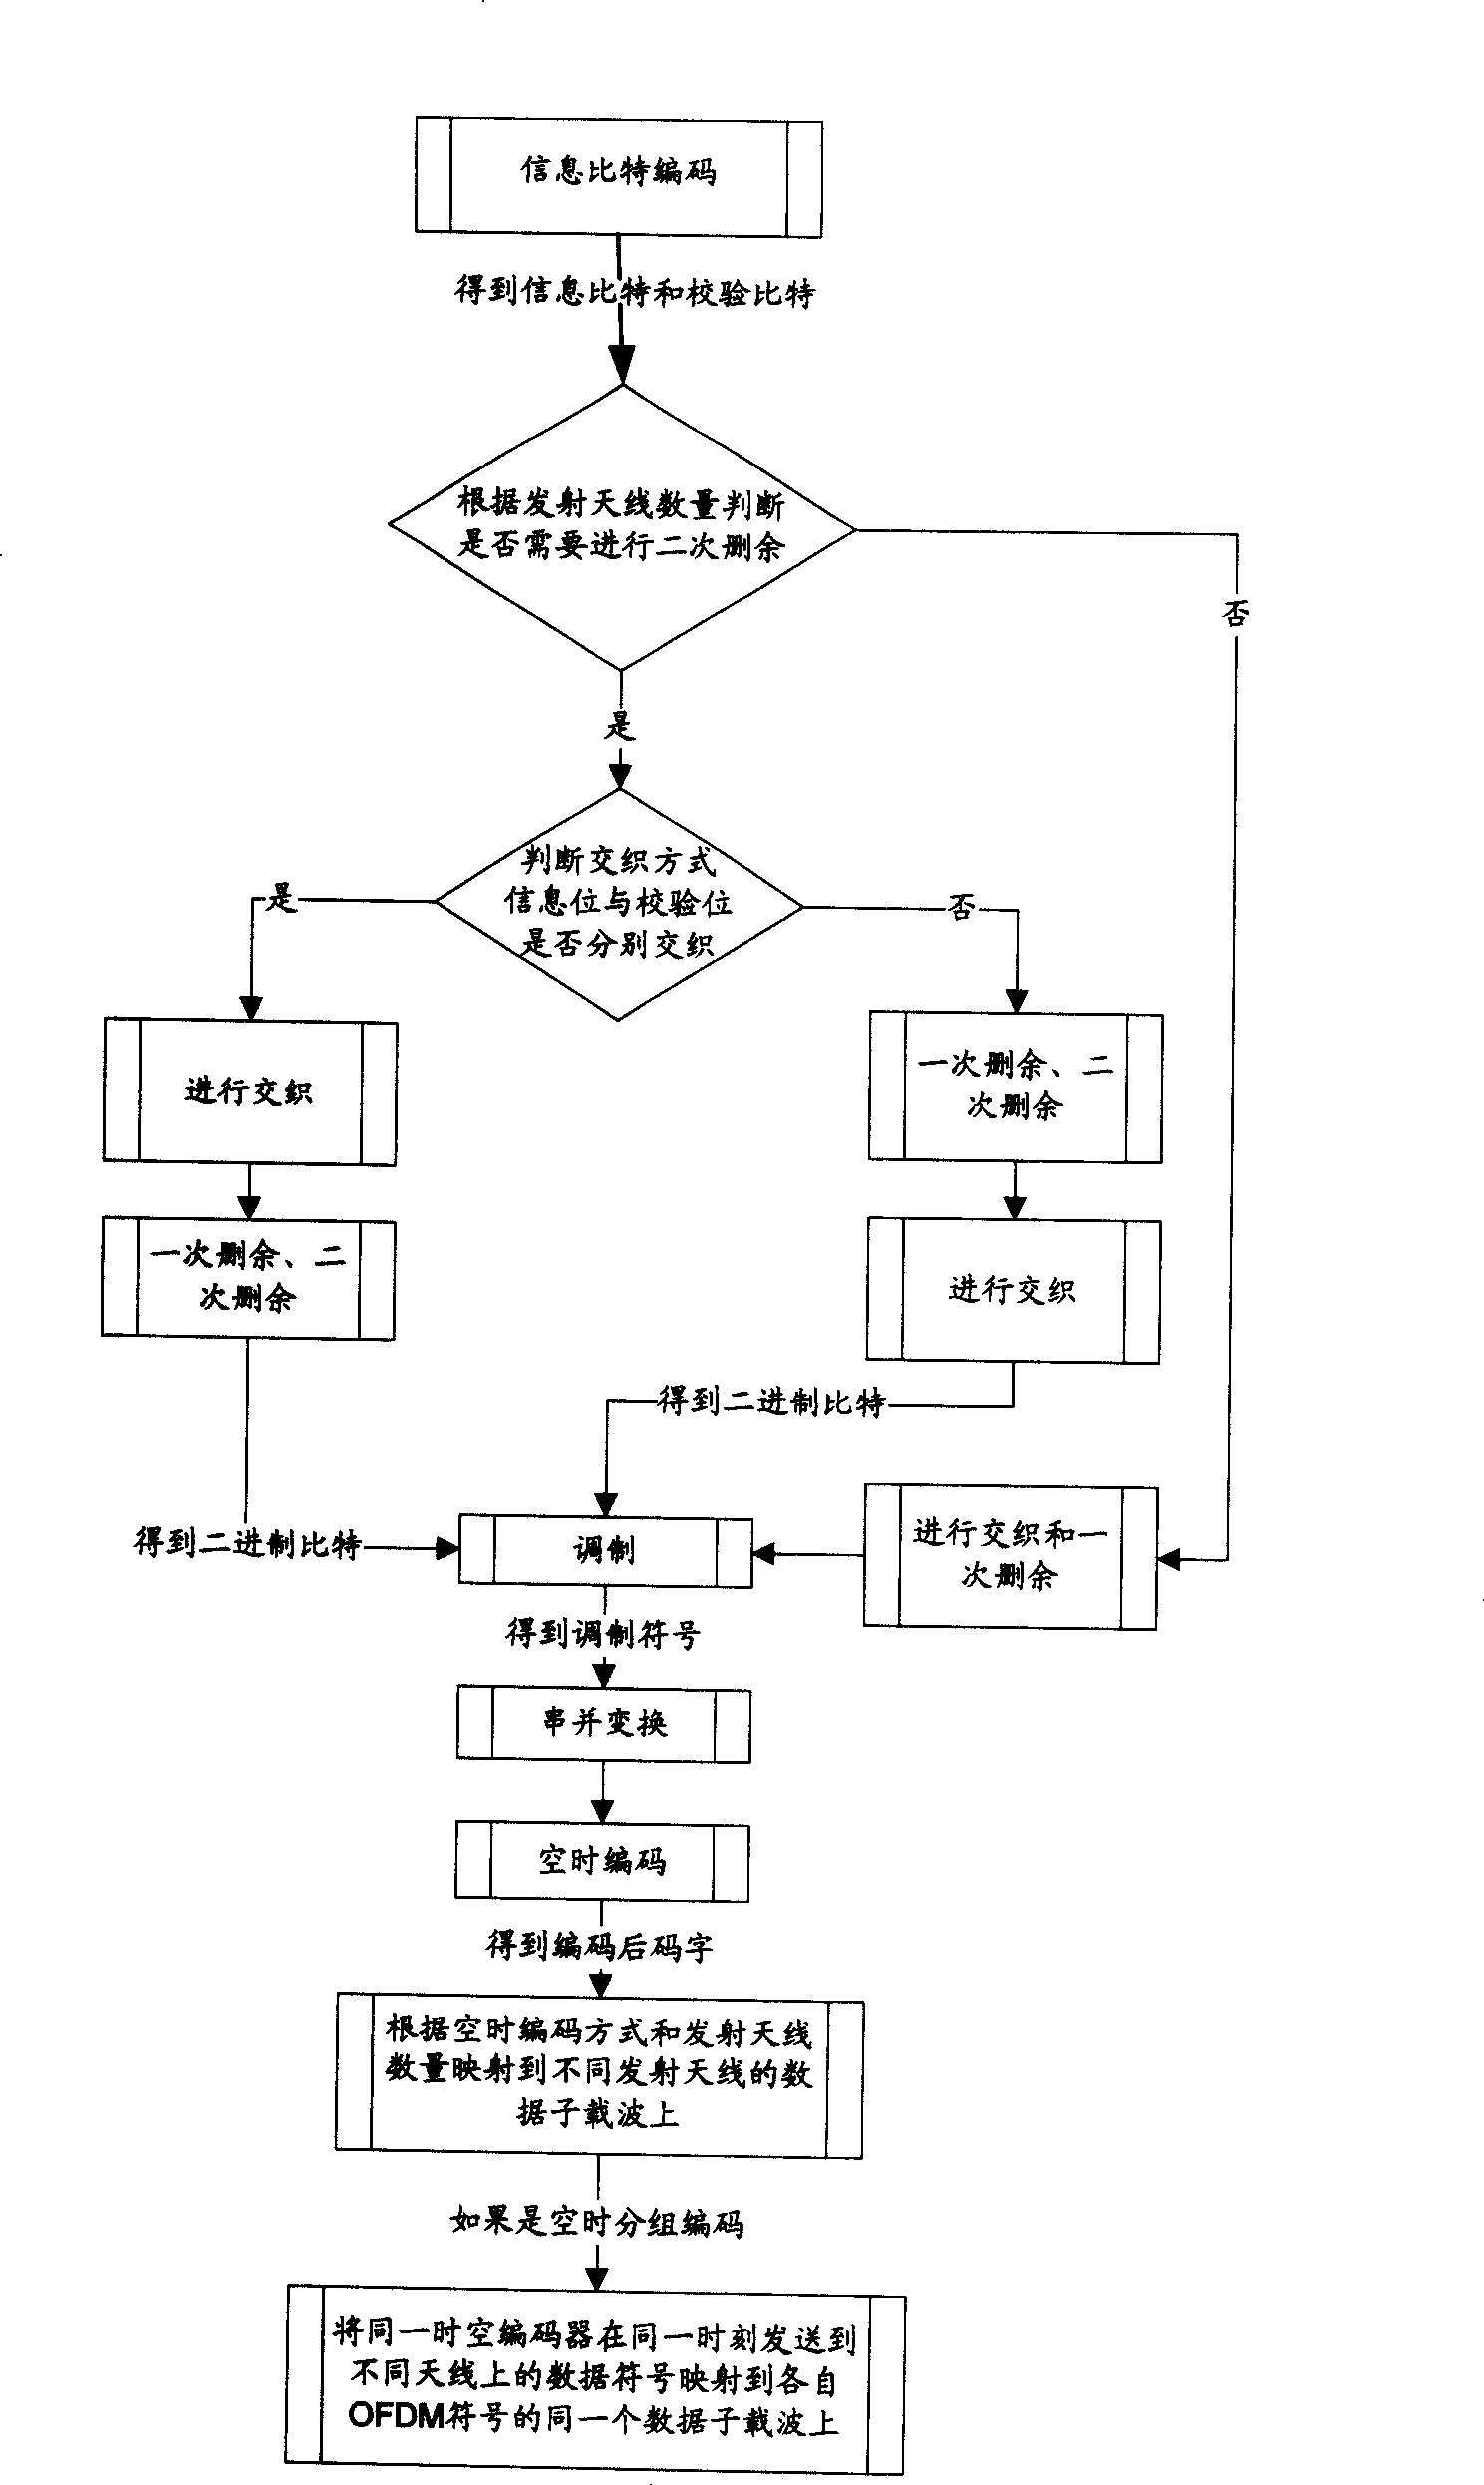 Cascade emission method of channel coding and space time coding